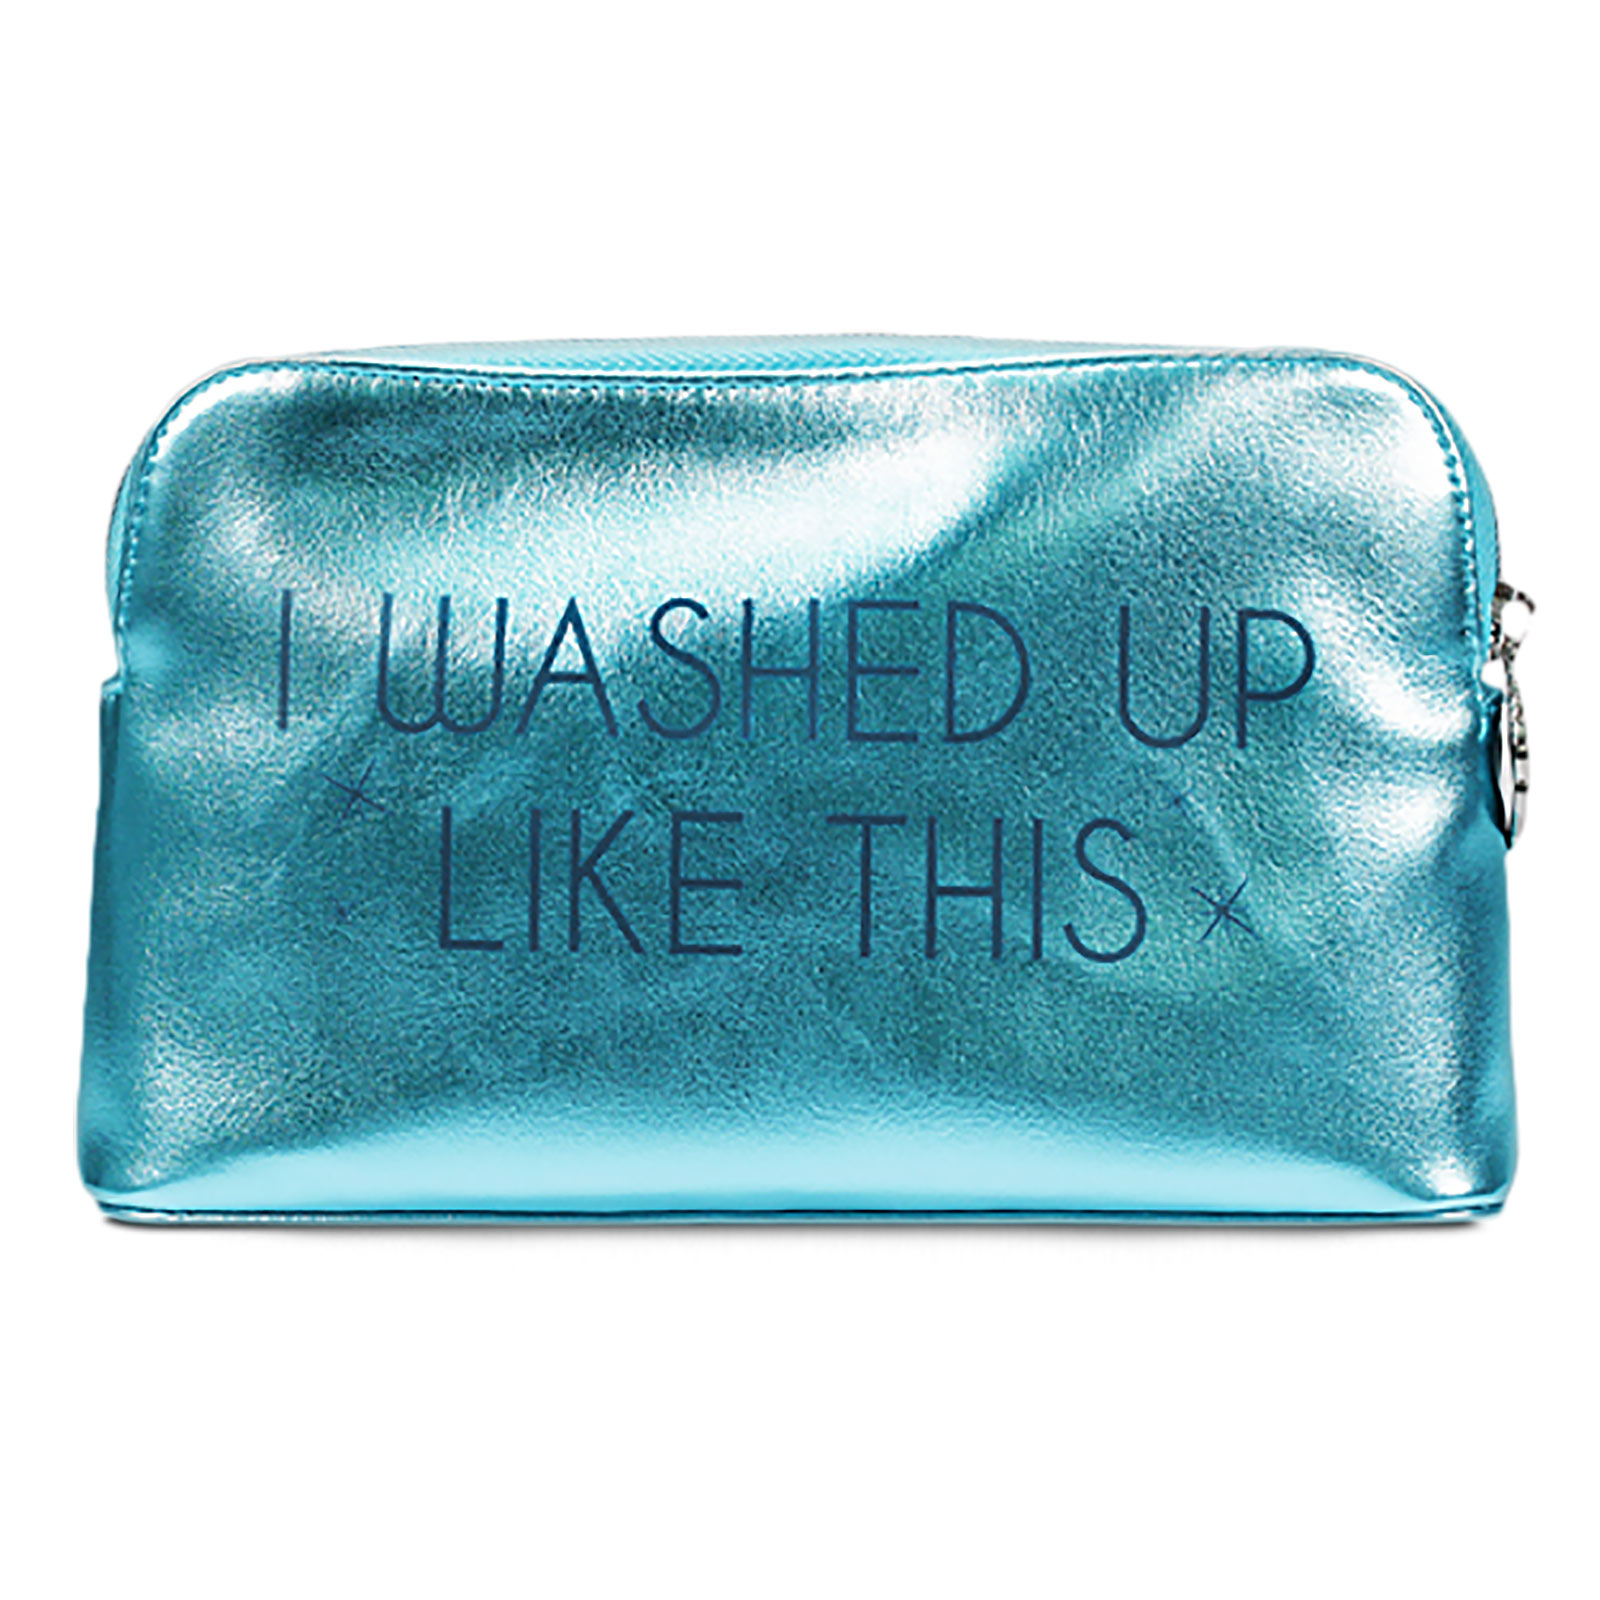 Arielle - Washed Up Like This Shimmer Cosmetic Bag